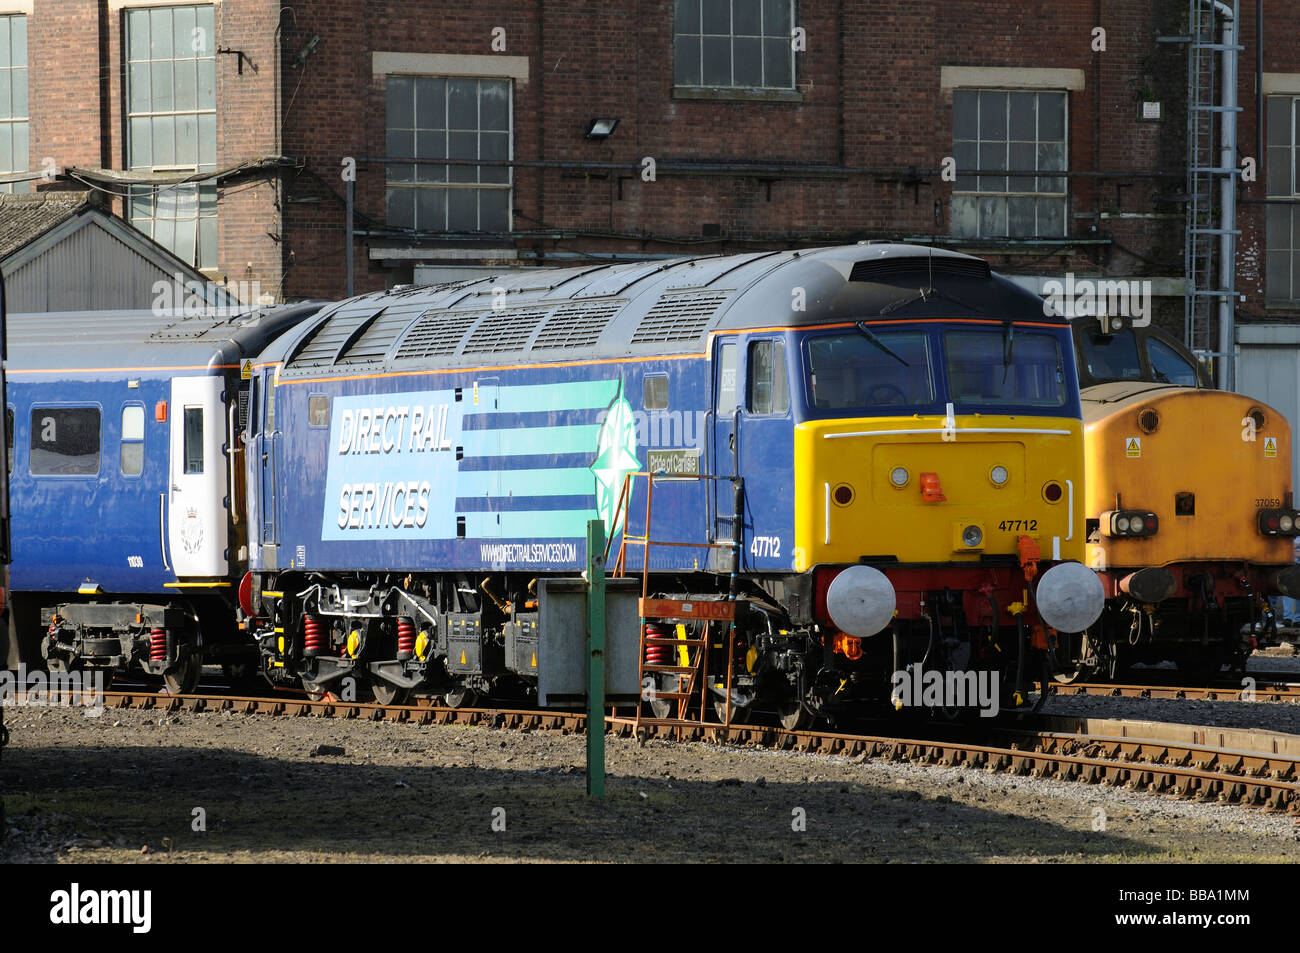 Direct Rail Services locomotive Pride of Carlisle a class 47 loco seen at Eastleigh Hampshire England Stock Photo